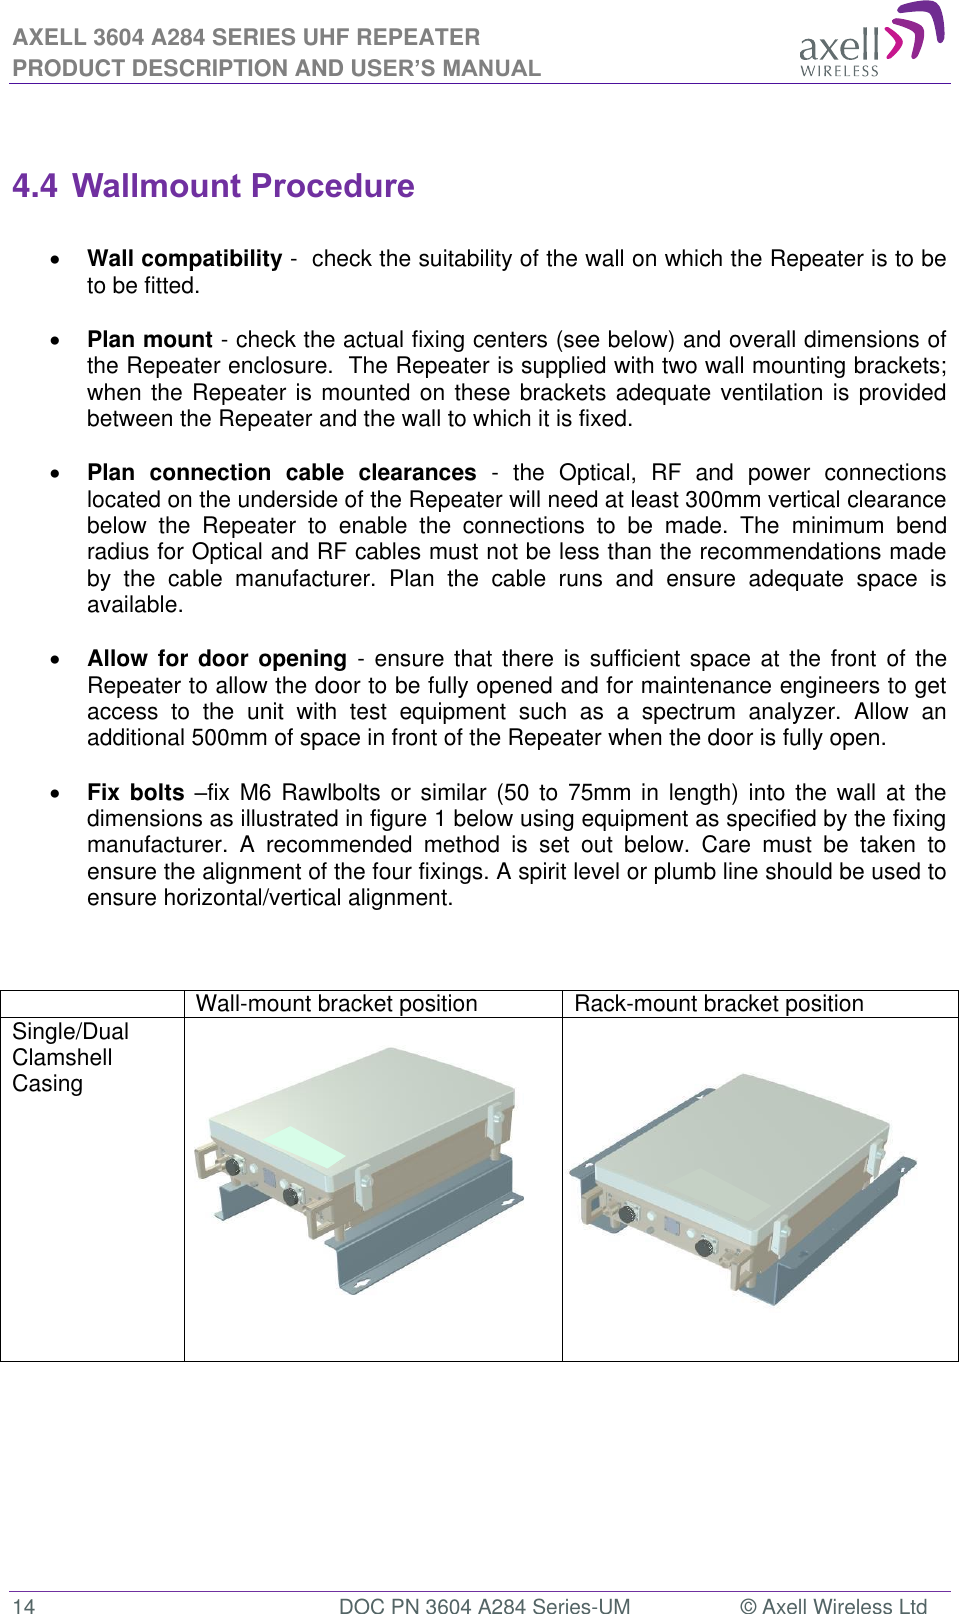 AXELL 3604 A284 SERIES UHF REPEATER PRODUCT DESCRIPTION AND USER’S MANUAL  14  DOC PN 3604 A284 Series-UM  © Axell Wireless Ltd   4.4 Wallmount Procedure   Wall compatibility -  check the suitability of the wall on which the Repeater is to be to be fitted.    Plan mount - check the actual fixing centers (see below) and overall dimensions of the Repeater enclosure.  The Repeater is supplied with two wall mounting brackets; when the Repeater is mounted on these brackets adequate ventilation is provided between the Repeater and the wall to which it is fixed.   Plan  connection  cable  clearances  -  the  Optical,  RF  and  power  connections located on the underside of the Repeater will need at least 300mm vertical clearance below  the  Repeater  to  enable  the  connections  to  be  made.  The  minimum  bend radius for Optical and RF cables must not be less than the recommendations made by  the  cable  manufacturer.  Plan  the  cable  runs  and  ensure  adequate  space  is available.   Allow for  door opening  - ensure  that there  is sufficient space at the  front of  the Repeater to allow the door to be fully opened and for maintenance engineers to get access  to  the  unit  with  test  equipment  such  as  a  spectrum  analyzer.  Allow  an additional 500mm of space in front of the Repeater when the door is fully open.   Fix bolts fix M6  Rawlbolts  or similar  (50 to  75mm in  length)  into the  wall  at the dimensions as illustrated in figure 1 below using equipment as specified by the fixing manufacturer.  A  recommended  method  is  set  out  below.  Care  must  be  taken  to ensure the alignment of the four fixings. A spirit level or plumb line should be used to ensure horizontal/vertical alignment.     Wall-mount bracket position Rack-mount bracket position Single/Dual Clamshell Casing                        